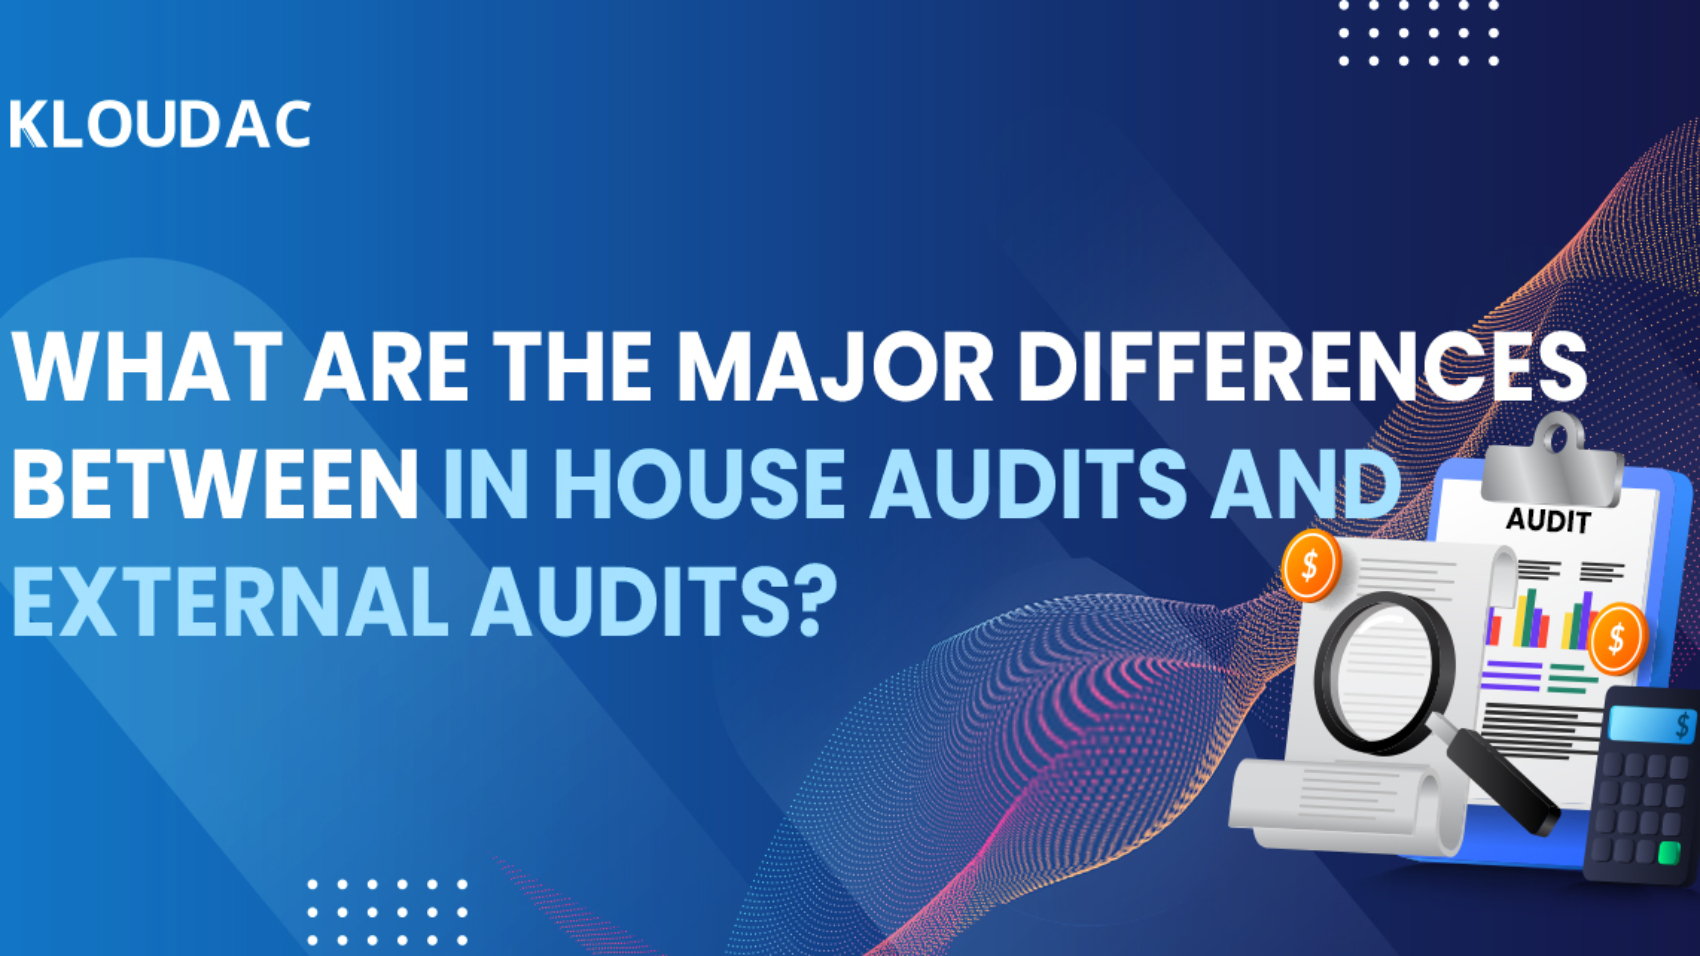 What are the major differences between in-house audits and external audits?